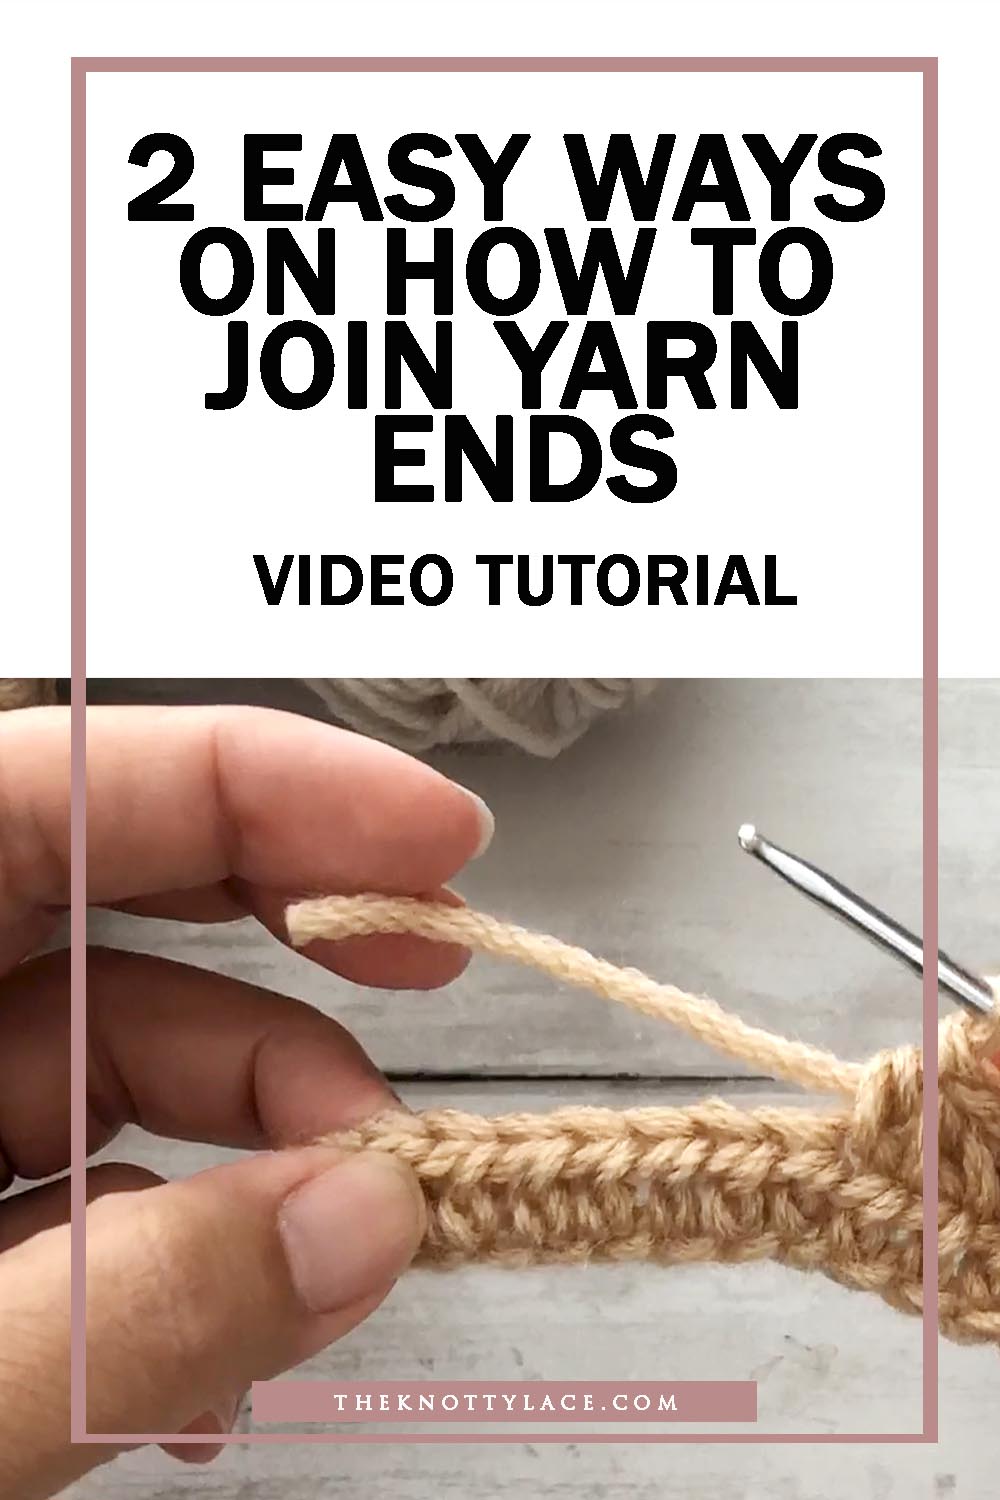 2 easy ways on How to join yarn ends video tutorial